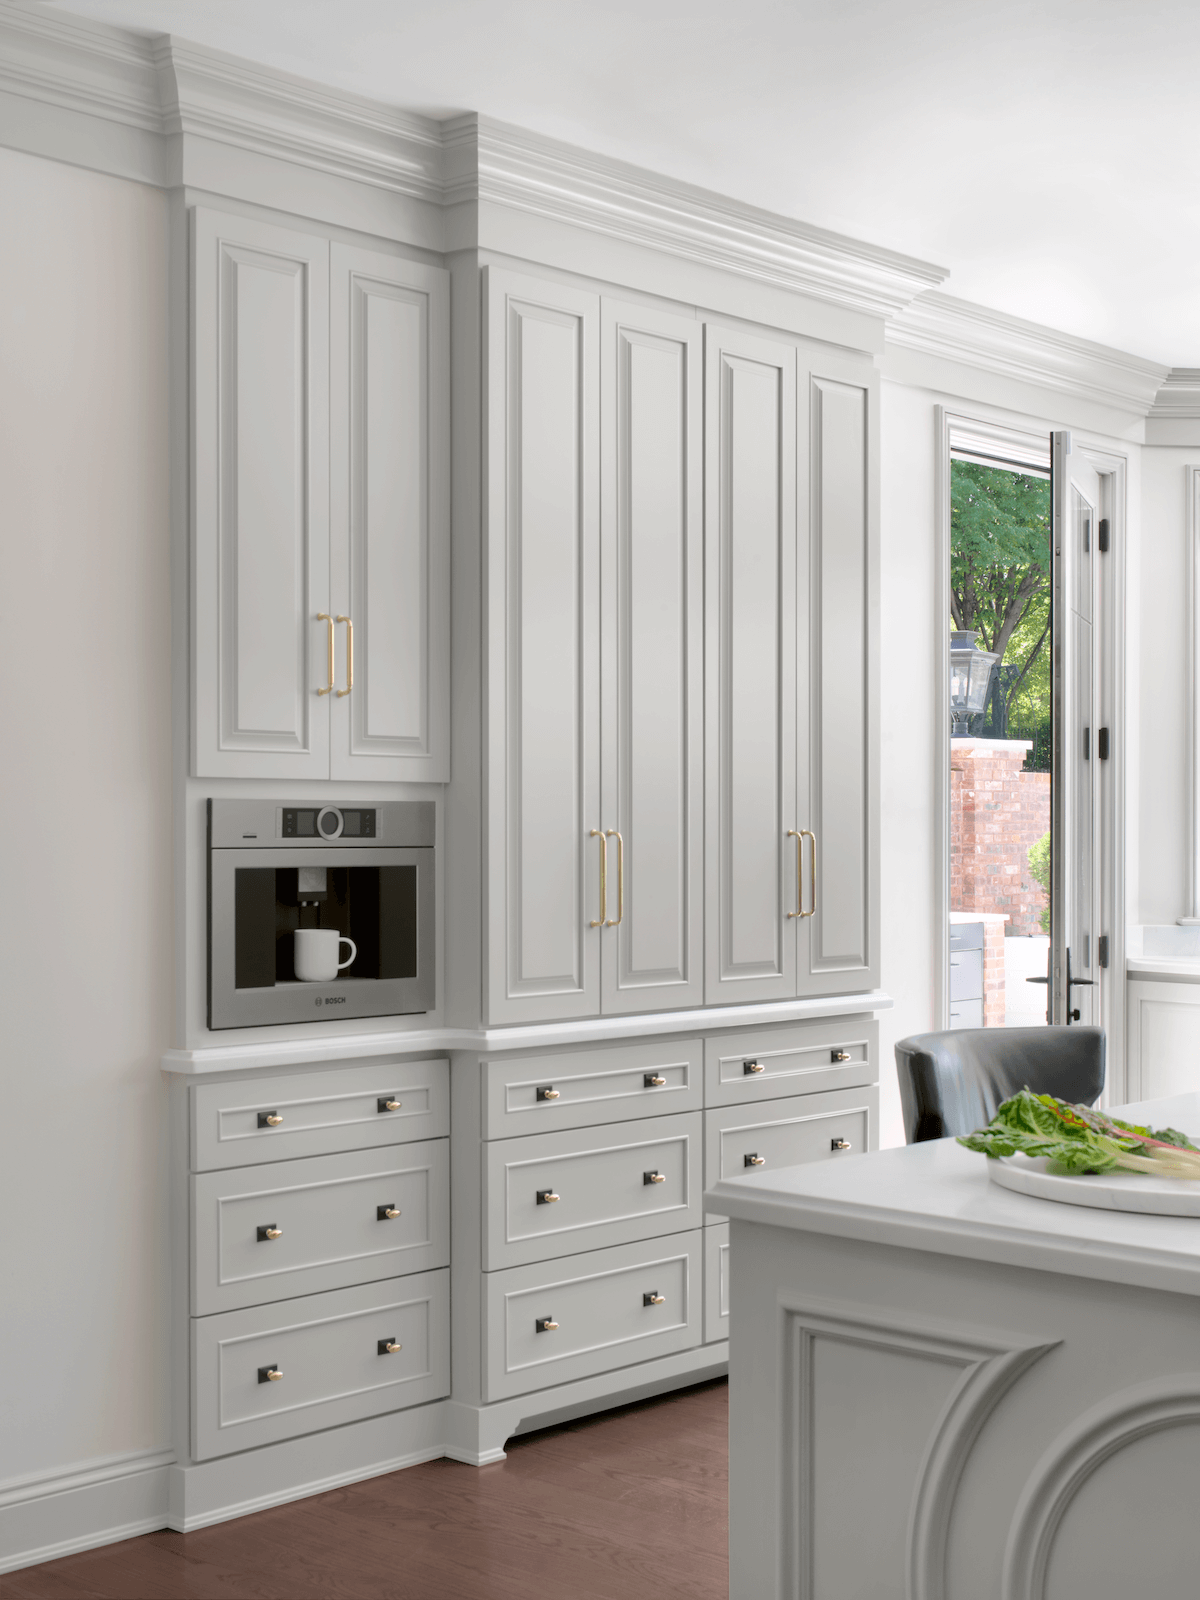 Built-in Coffee Machine and Cabinetry